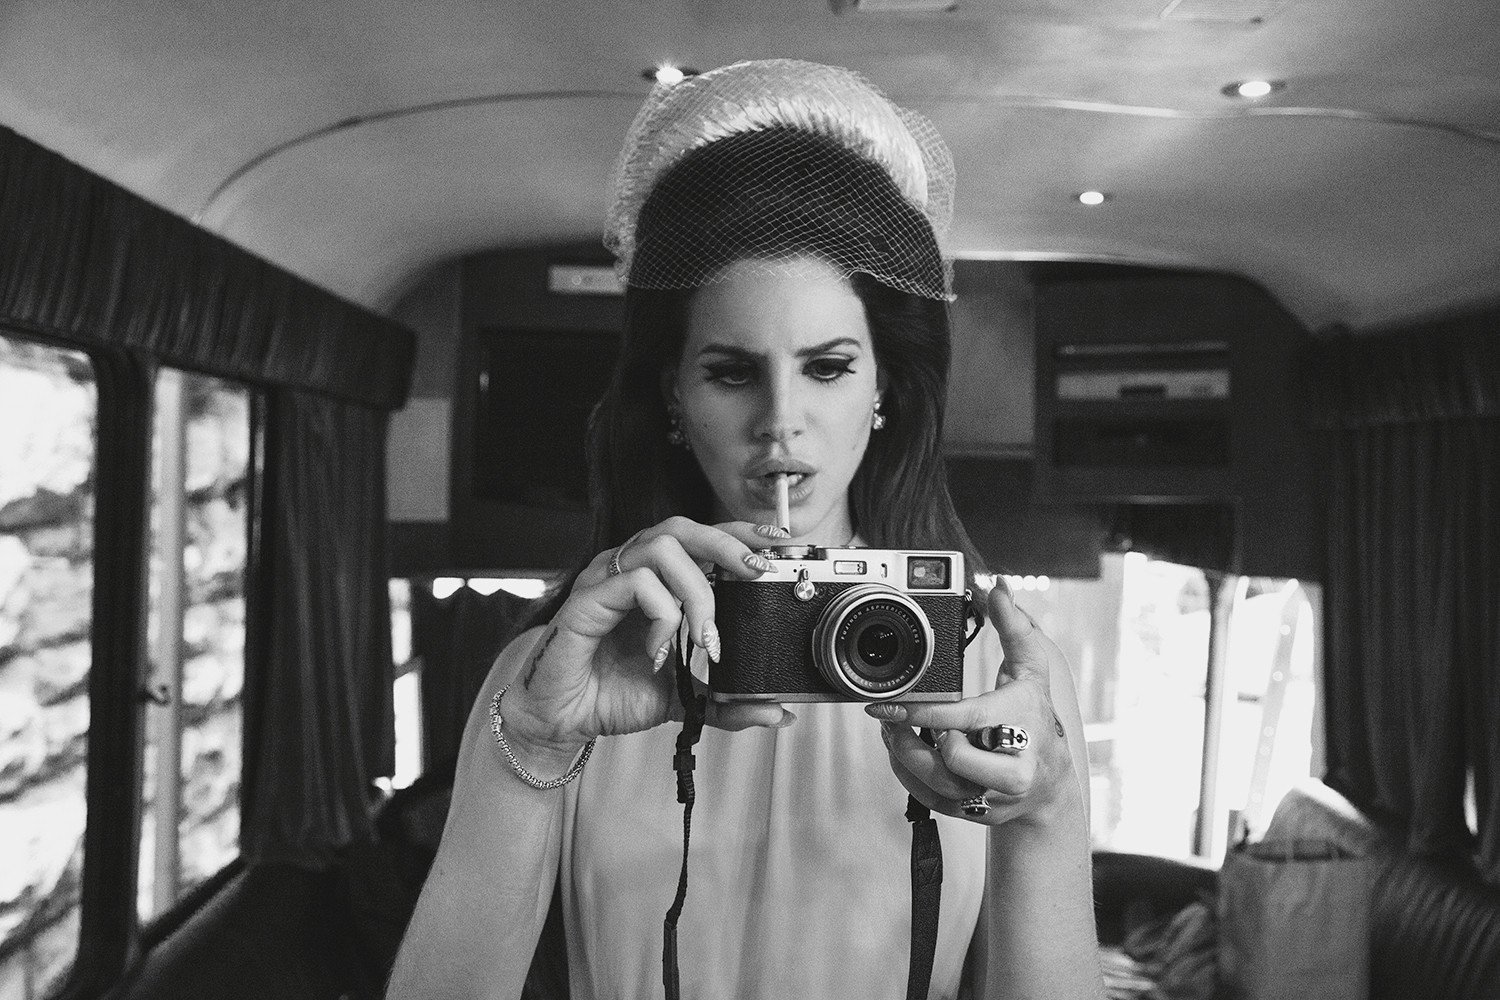 lana del rey iphone wallpaper,photograph,white,black,black and white,photography